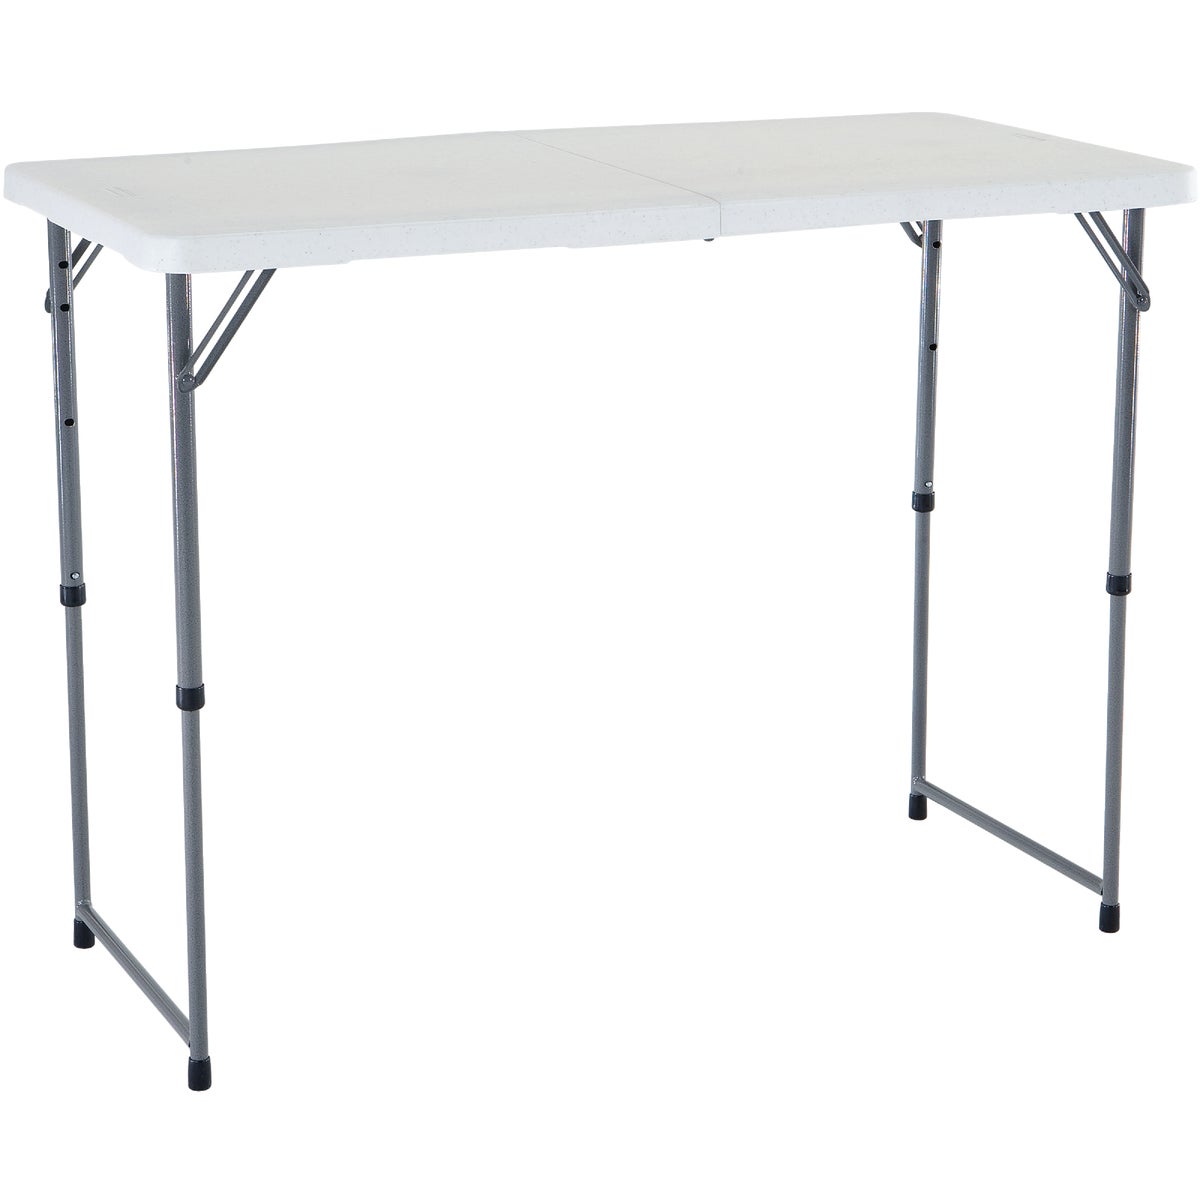 Item 600621, Lightweight and durable, contemporary design, light commercial.